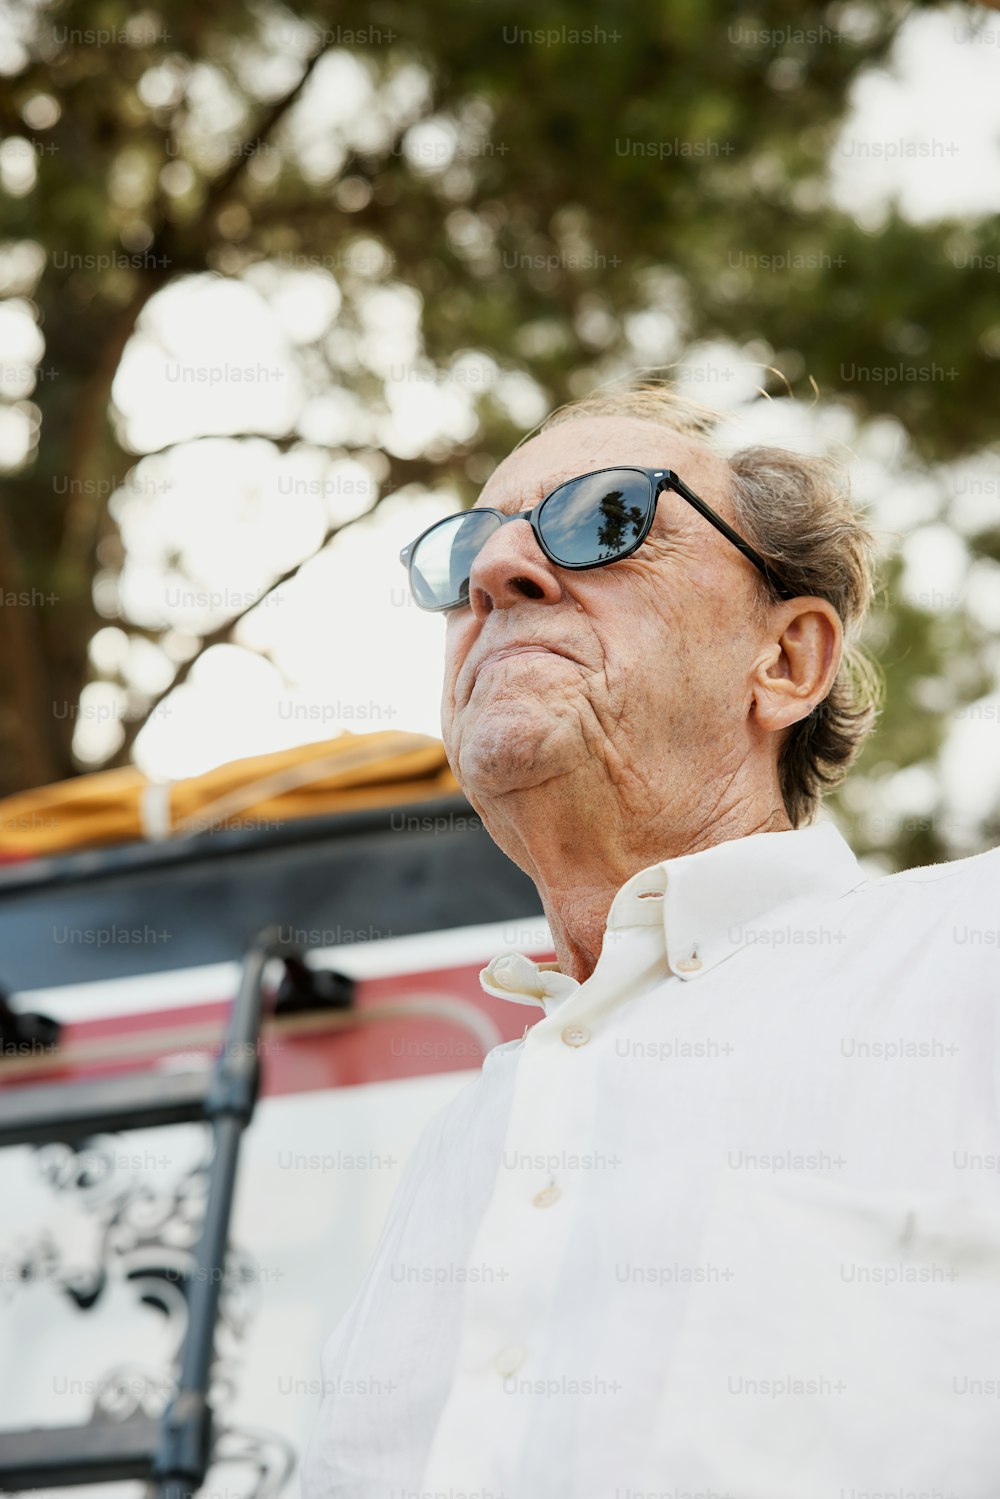 a man wearing sunglasses and a white shirt